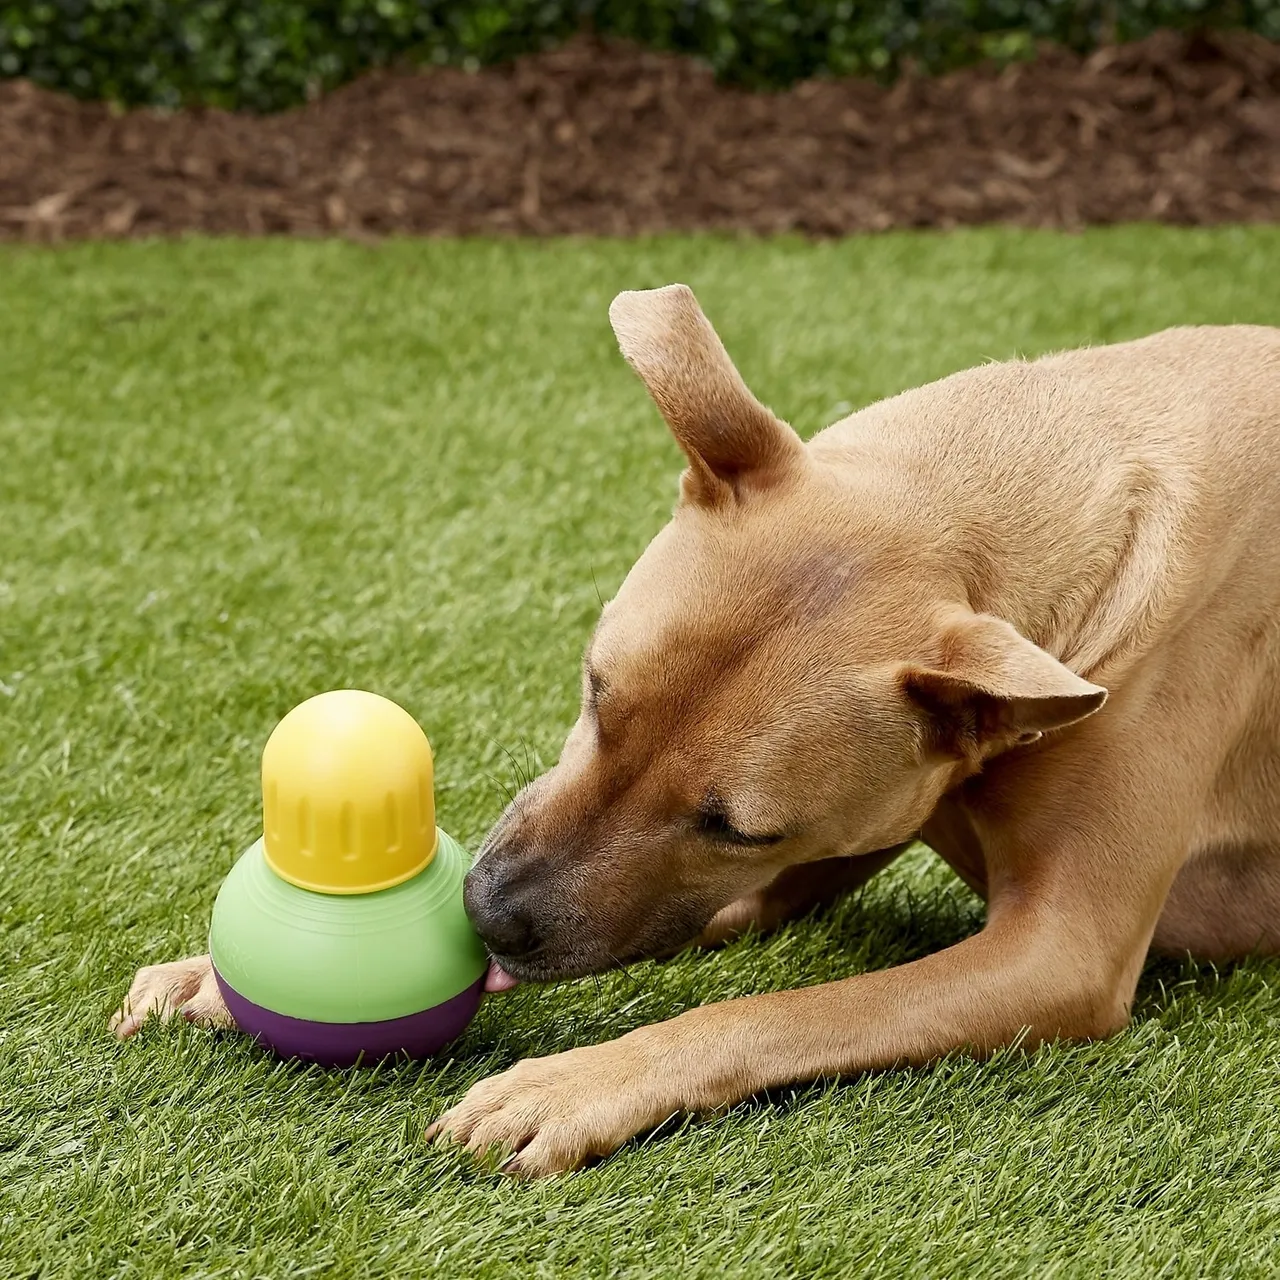 Puzzle toys can be a great source of enrichment for dogs, here's